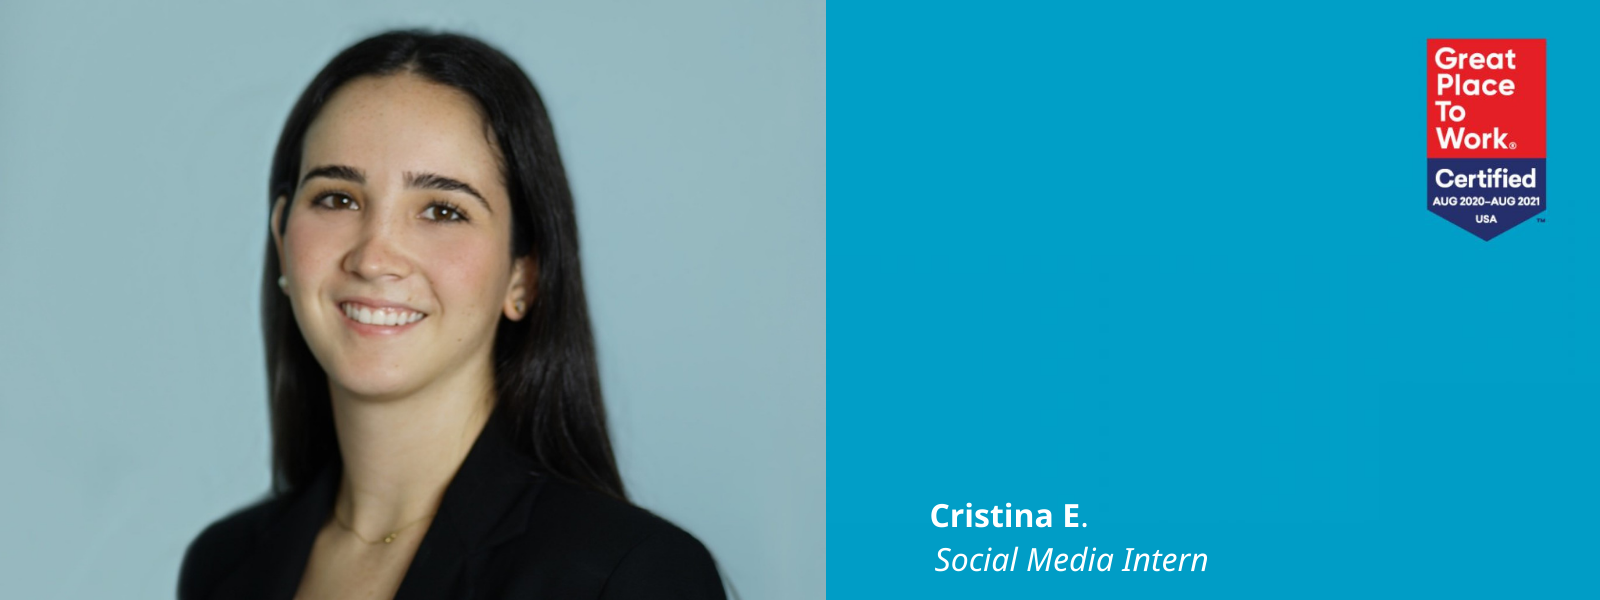 Photo of Cristina E. next to a blue box that has a Great Place To Work Certified logo in it and this text: Cristina E., Social Media Intern